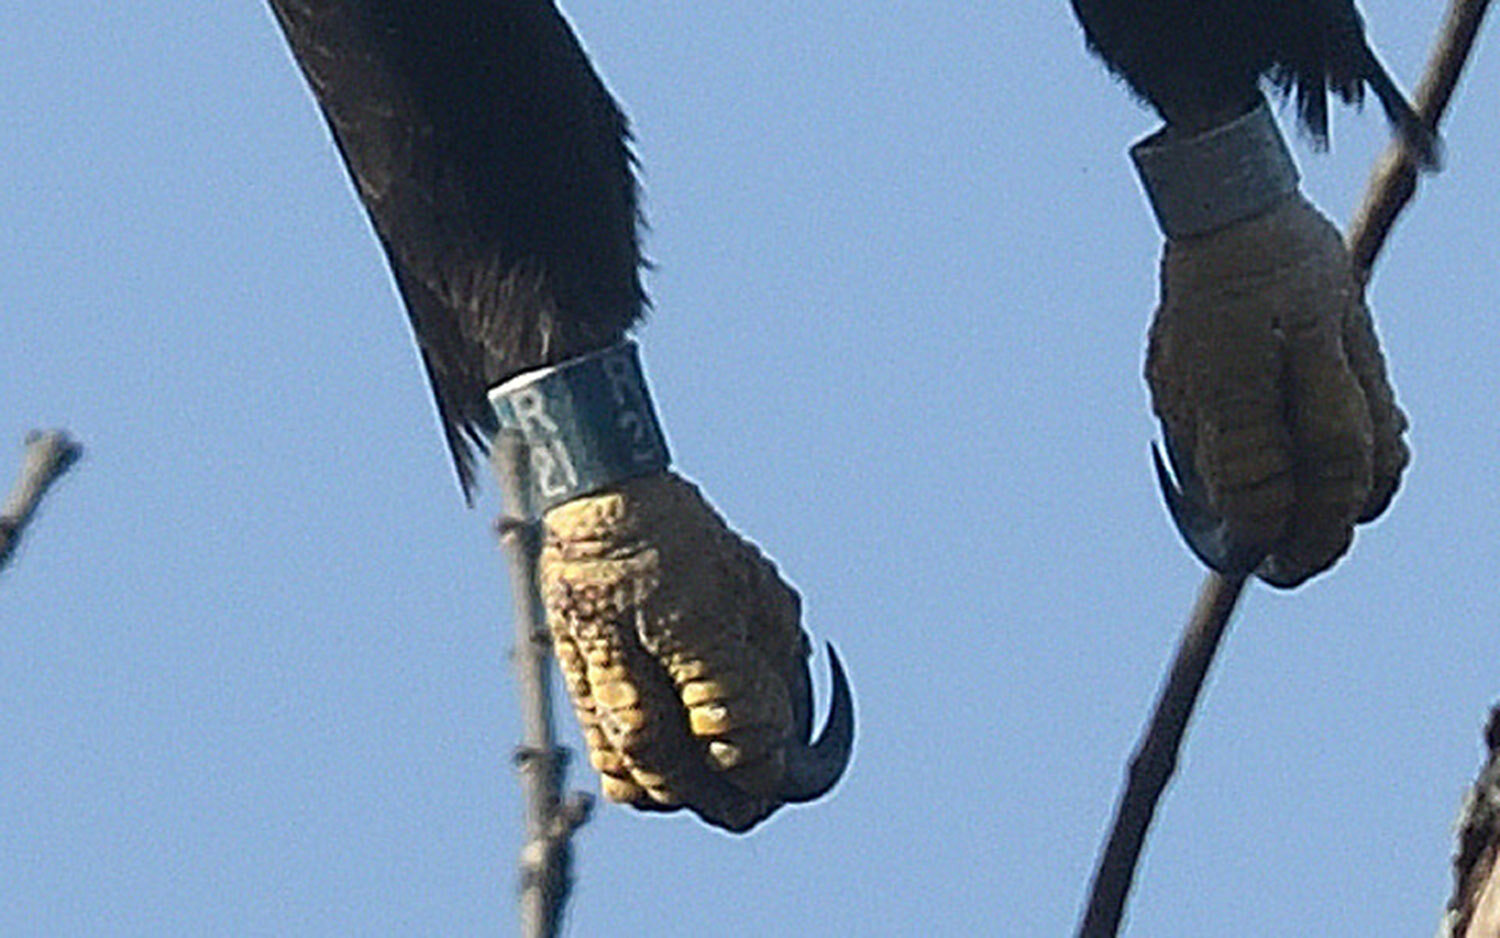 This is a cropped image of the male’s feet as it left to overfly the second pair of eagles near the river. The right foot of the eagle shows the blue band with “R 21” engraved on the surface. ..Blue is the color New York uses for bald eagles. Other states use various colors; Maine uses red bands, for example. The silver band on the left foot is a federal band (U.S. Fish & Wildlife Service). The numbers are smaller and harder to read. If you see a state color band on an eagle, try to read that one...